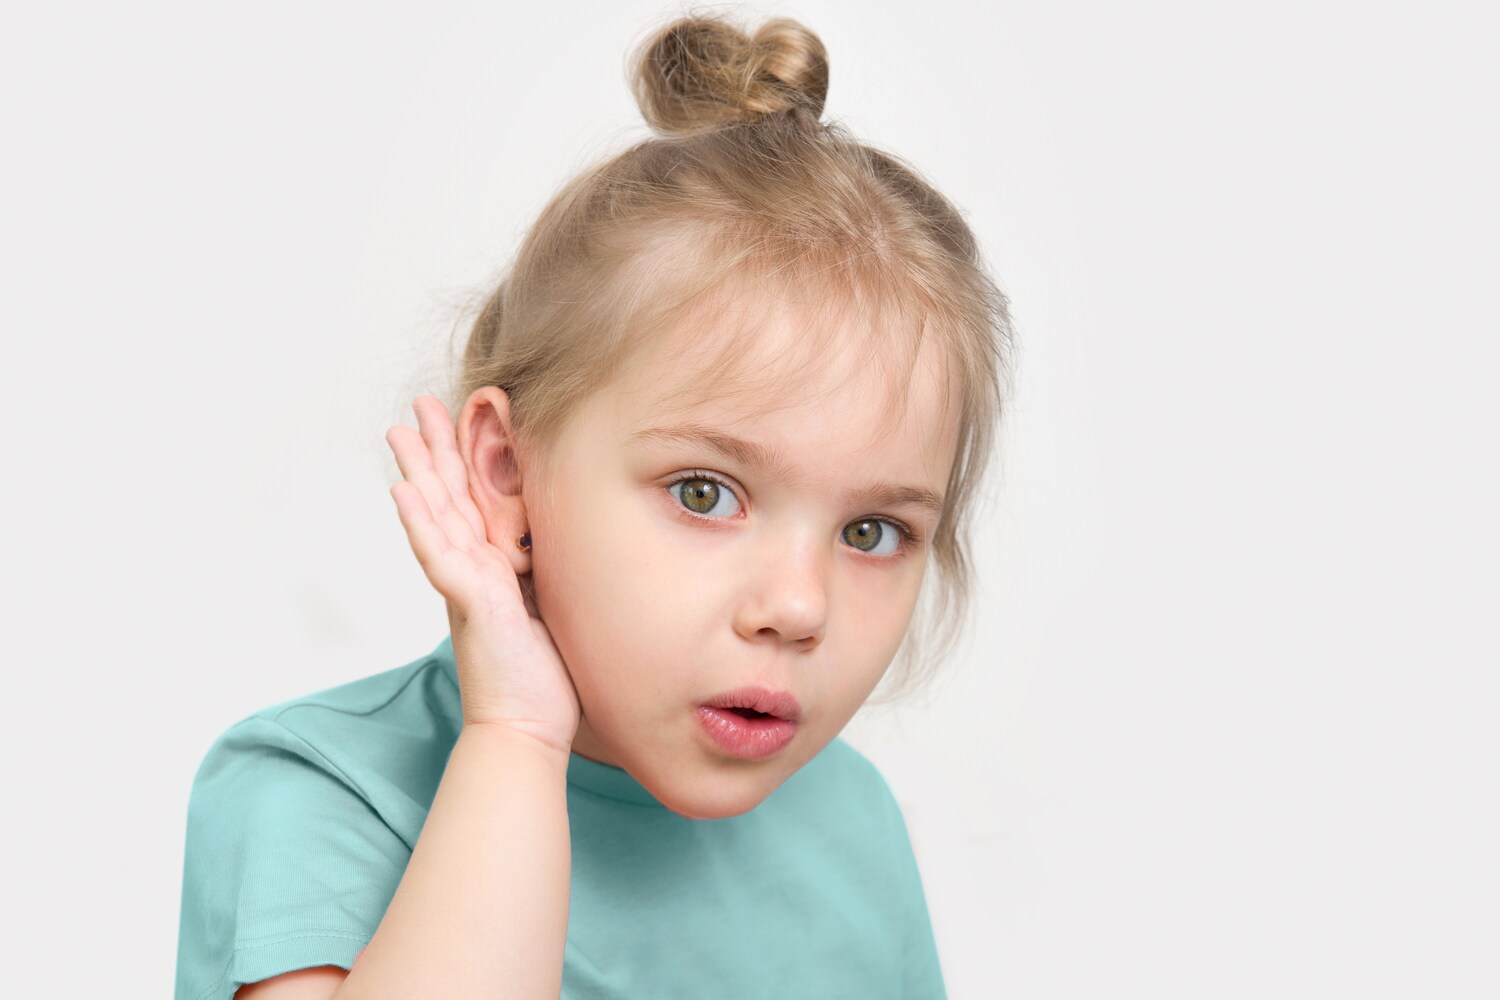 Hearing loss in toddlers